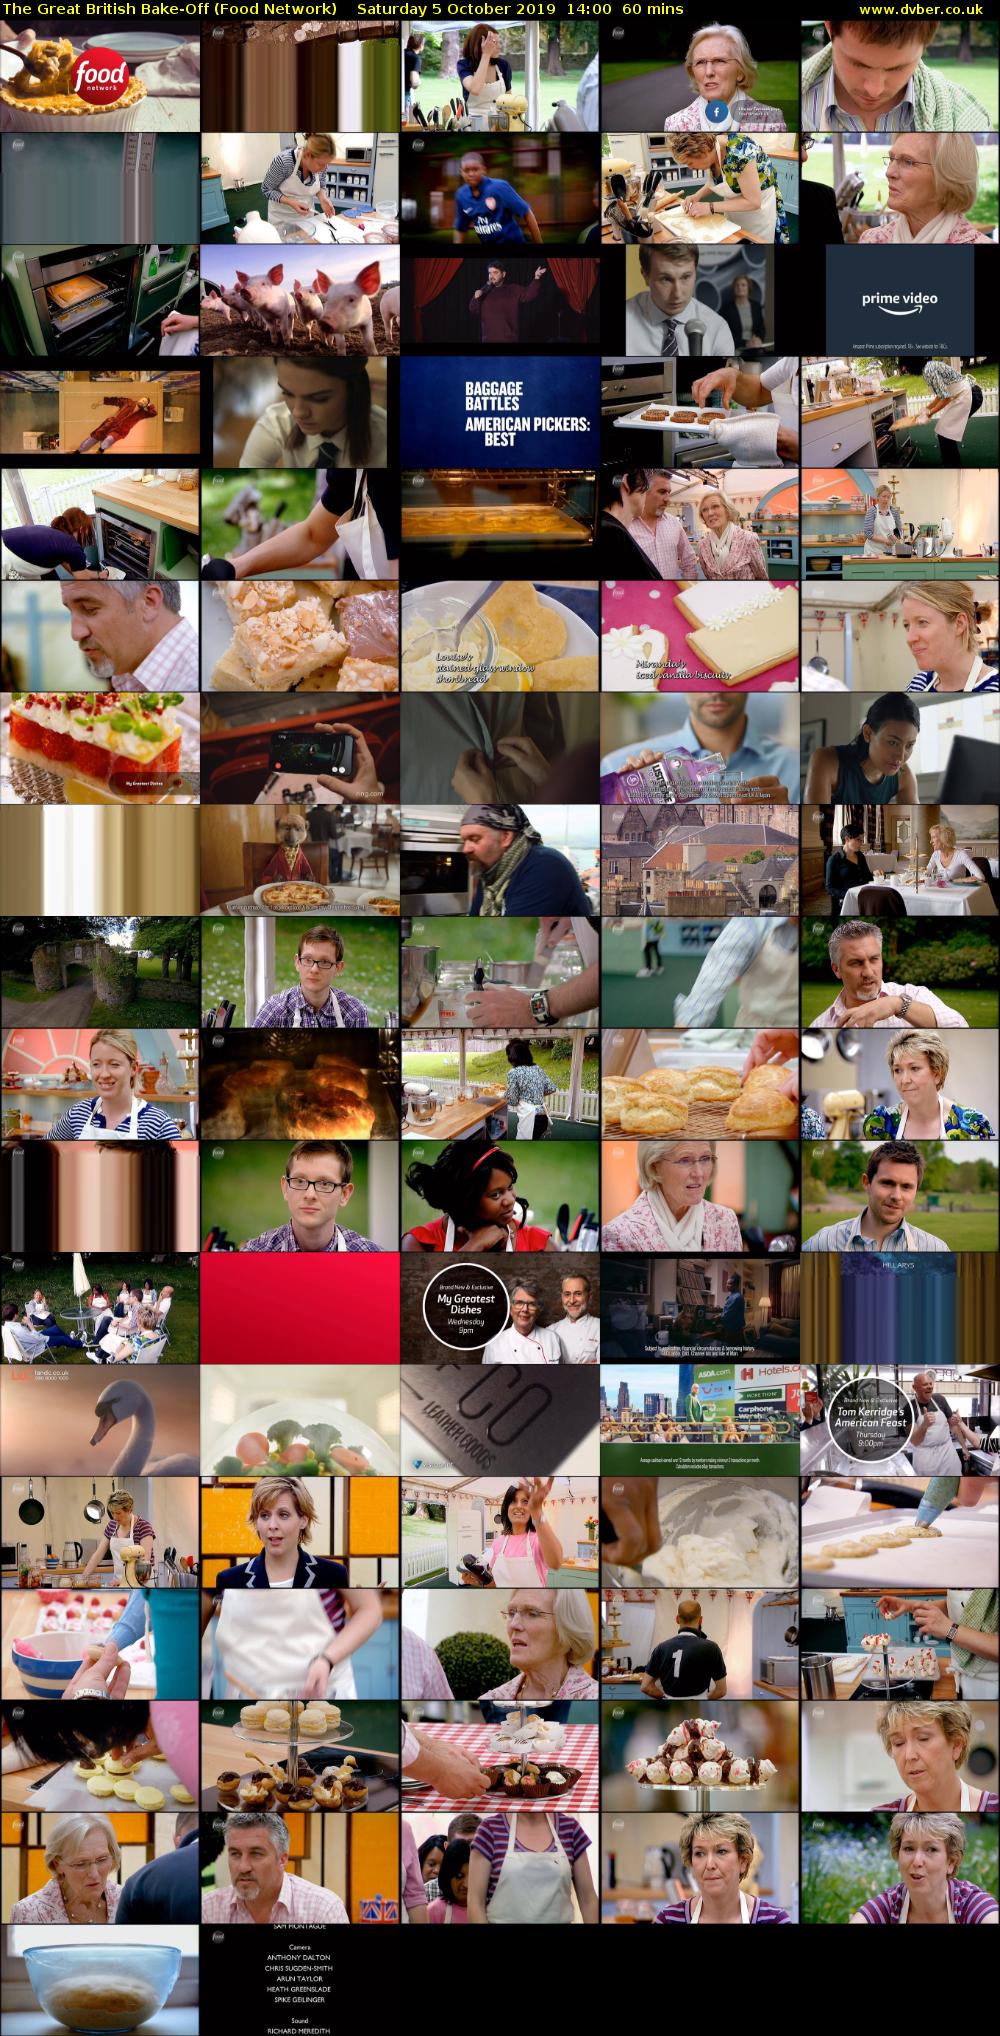 The Great British Bake-Off (Food Network) Saturday 5 October 2019 14:00 - 15:00